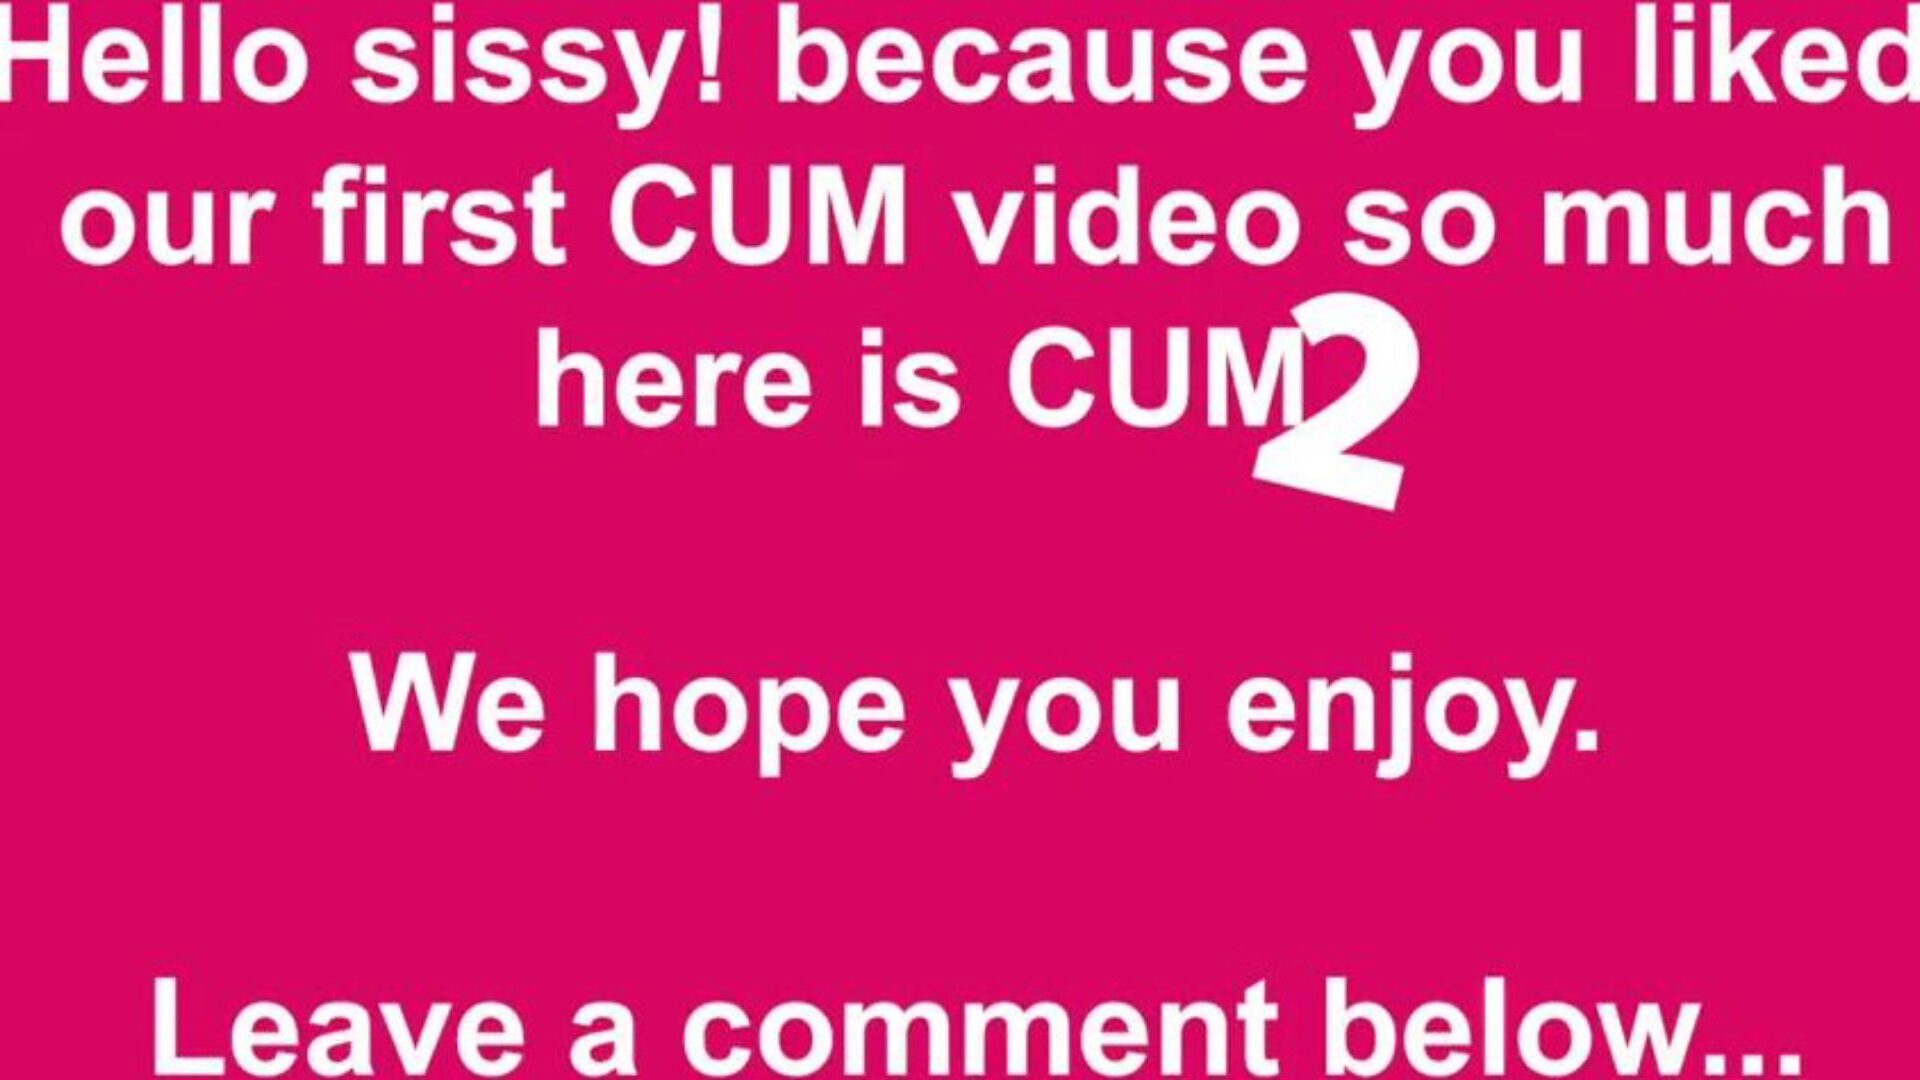 cum 2 free cum & cumming tube porn videos 49 - xhamster watch cum 2 tube hook-up episode for free on xhamster, with free domination of free cum cumming tube & tube two hd porn episode gigs